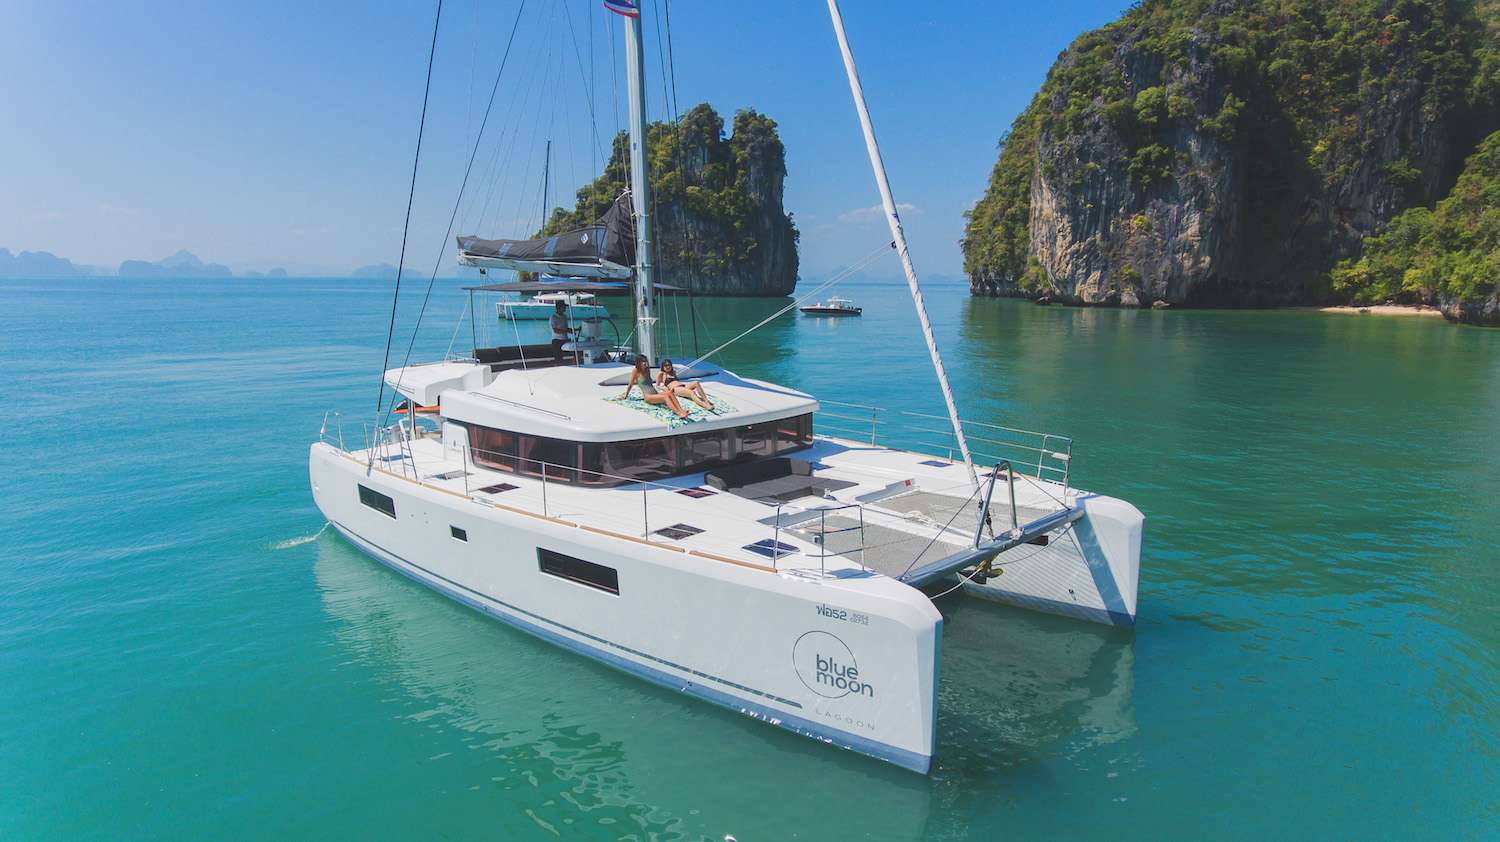 blue moon - Yacht Charter Koh Samui & Boat hire in Indian Ocean & SE Asia 2